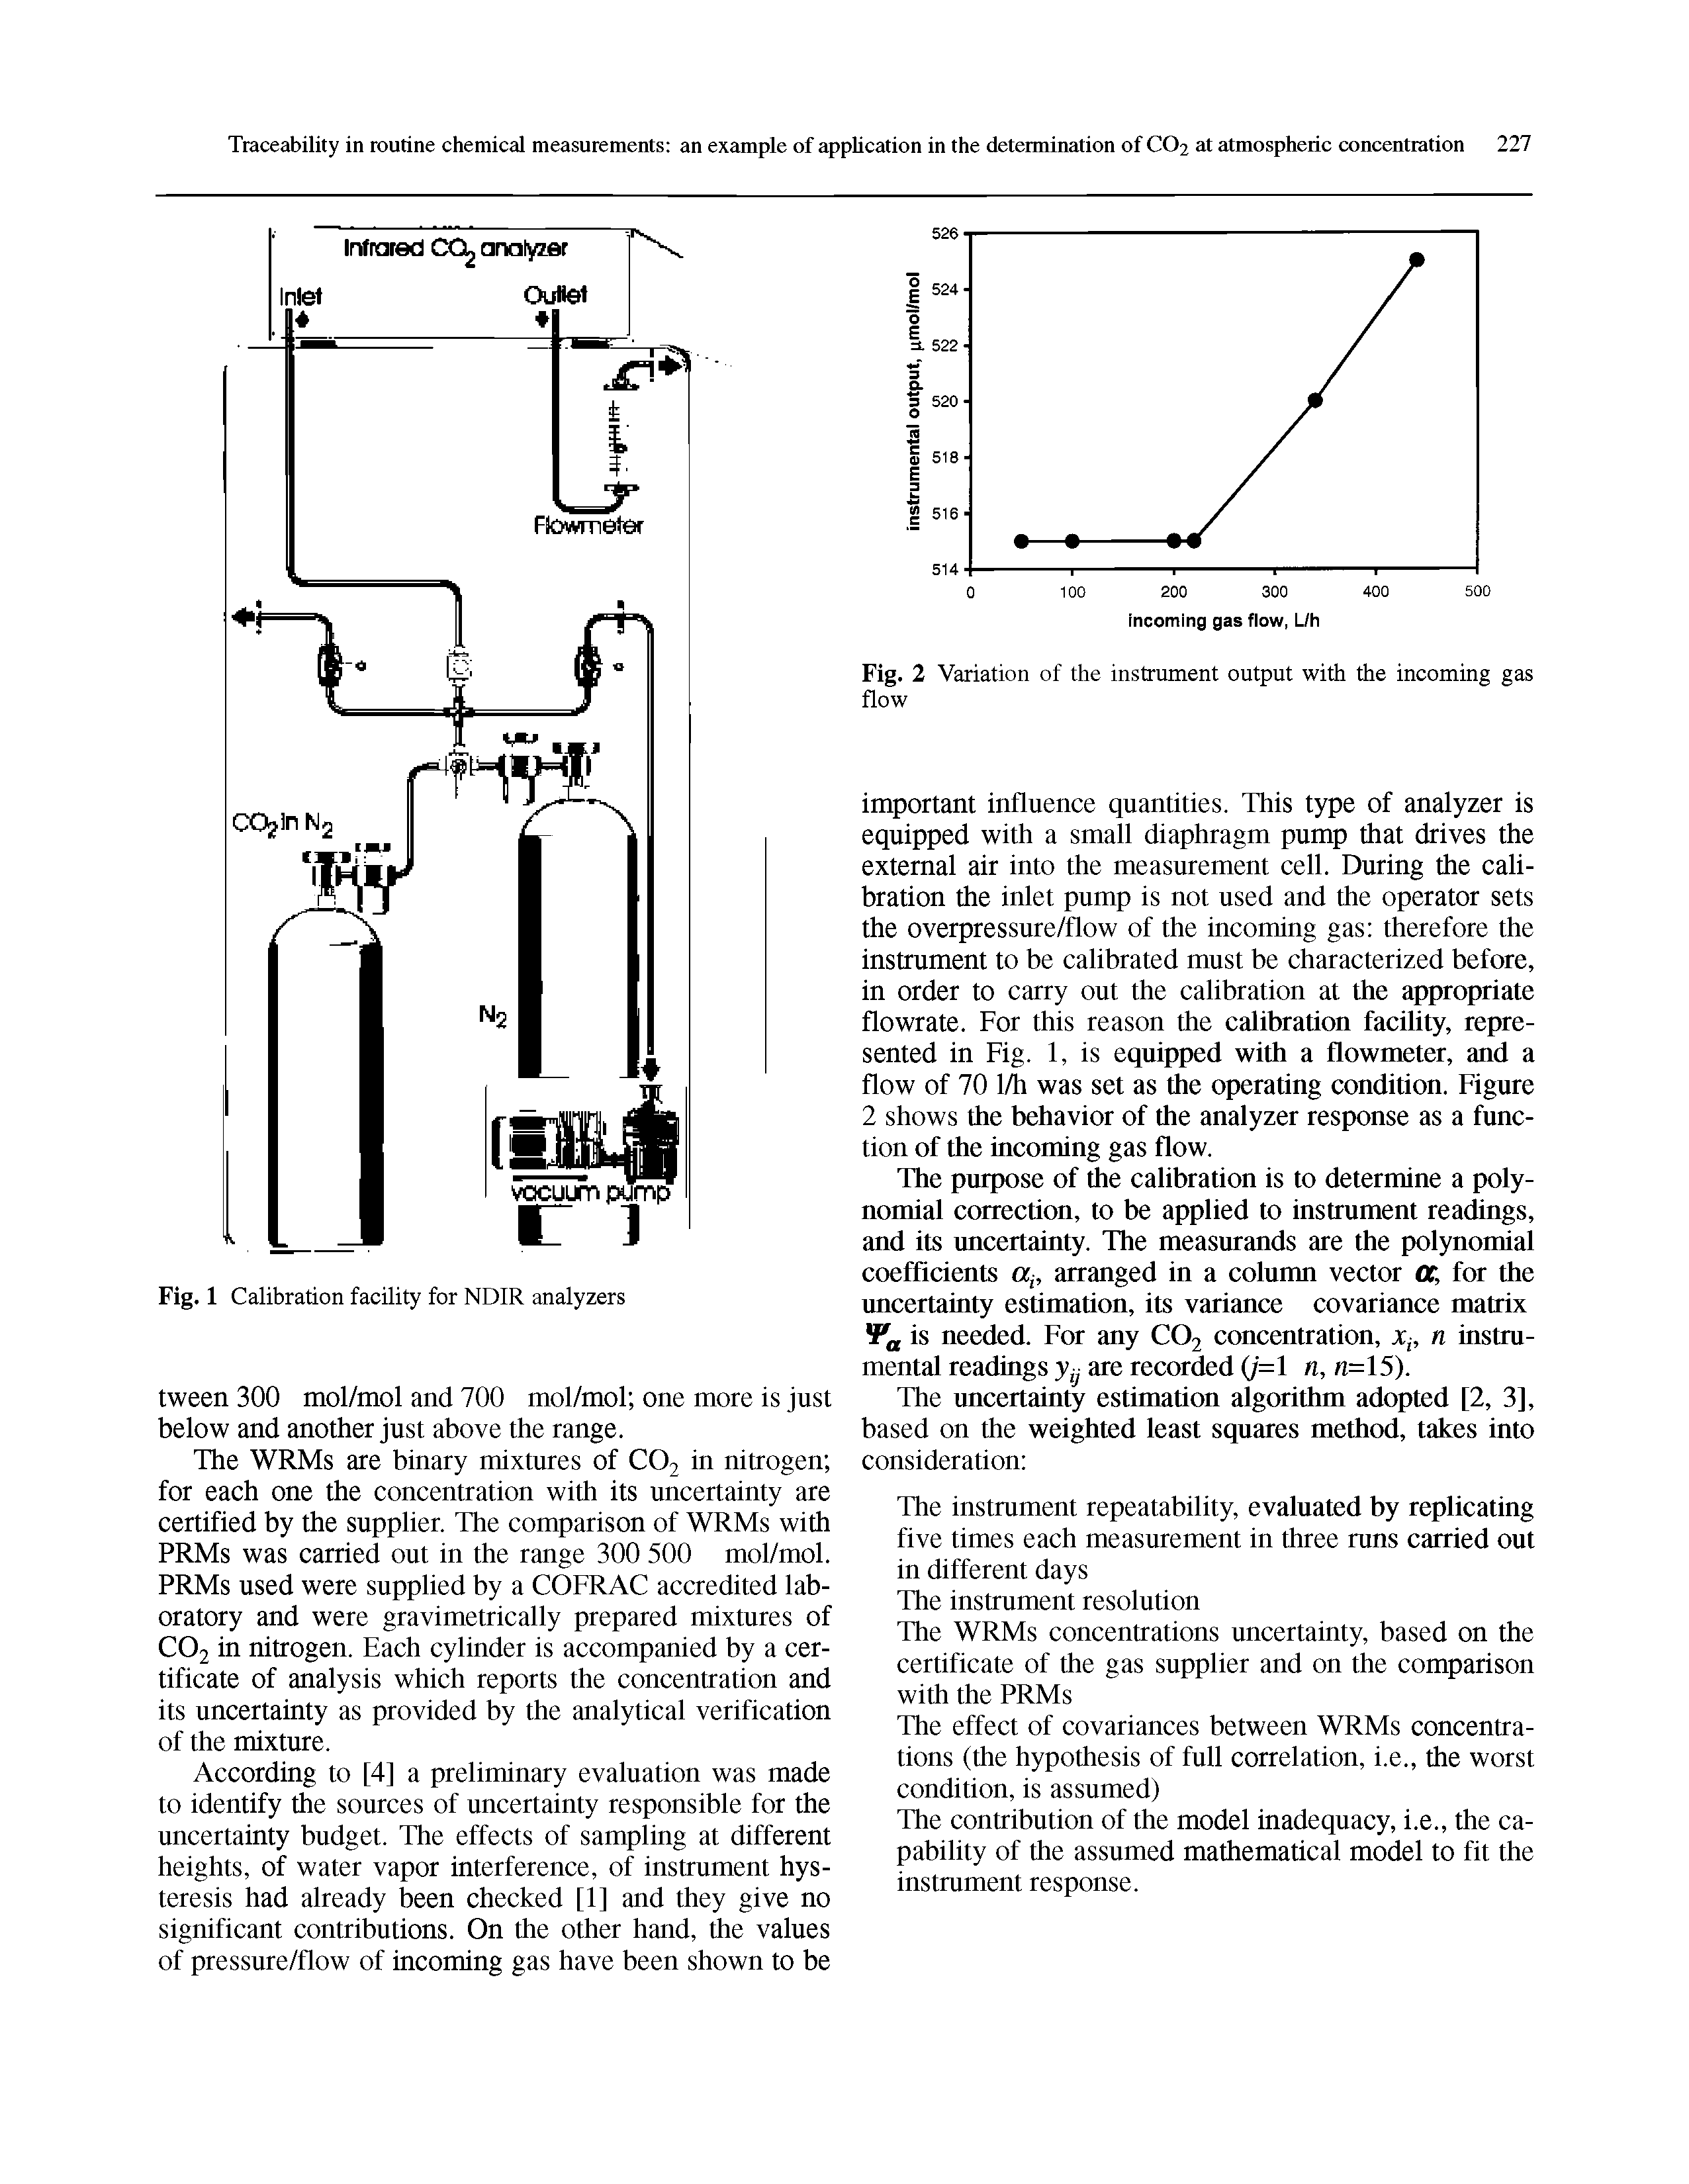 Fig. 2 Variation of the instrument output with the incoming gas flow...